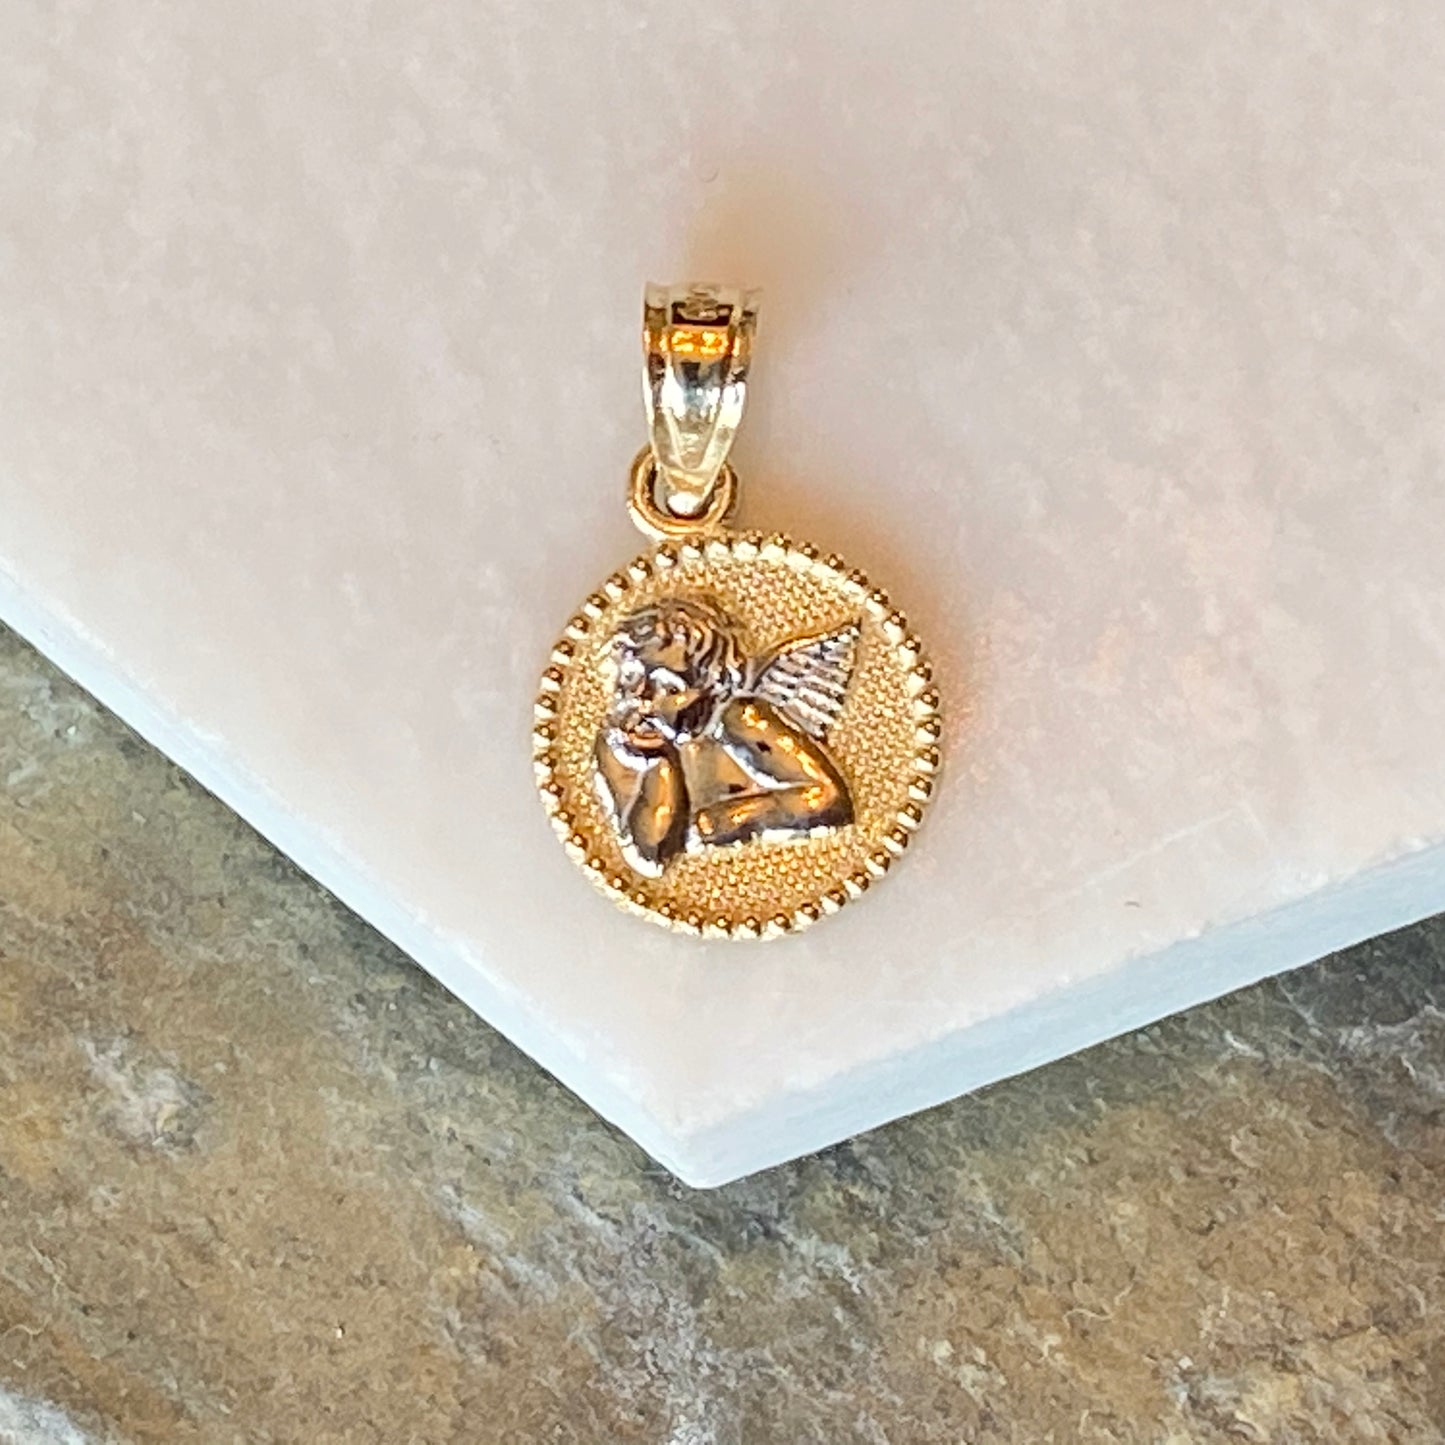 Two-Tone 10KT Yellow Gold + White Rhodium Guardian Angel Baby Round Medal Pendant Charm, Two-Tone 10KT Yellow Gold + White Rhodium Guardian Angel Baby Round Medal Pendant Charm - Legacy Saint Jewelry